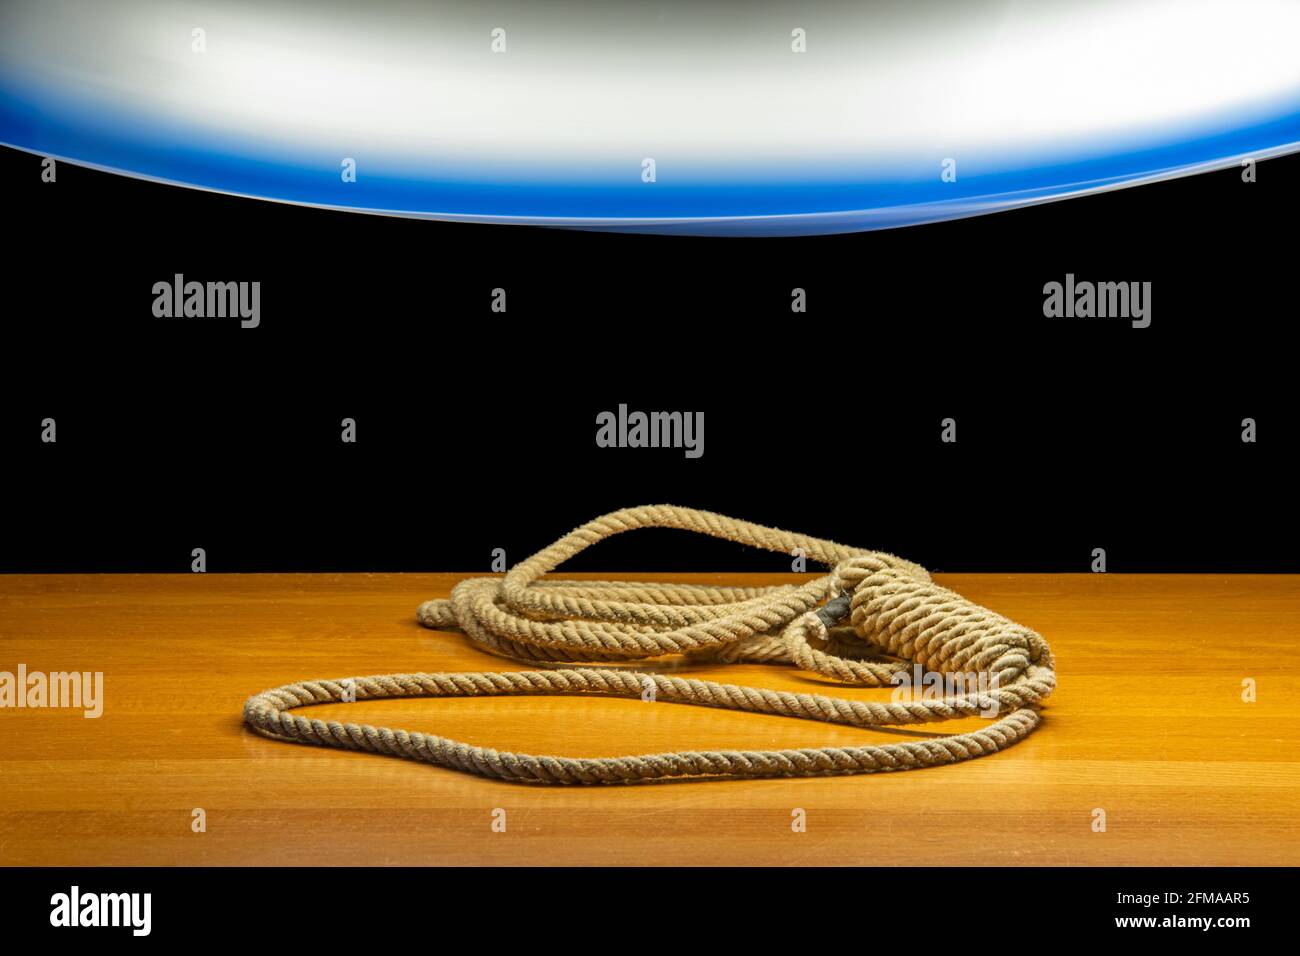 A noose lying on the table under a light of moving chandelier, on a black background Stock Photo